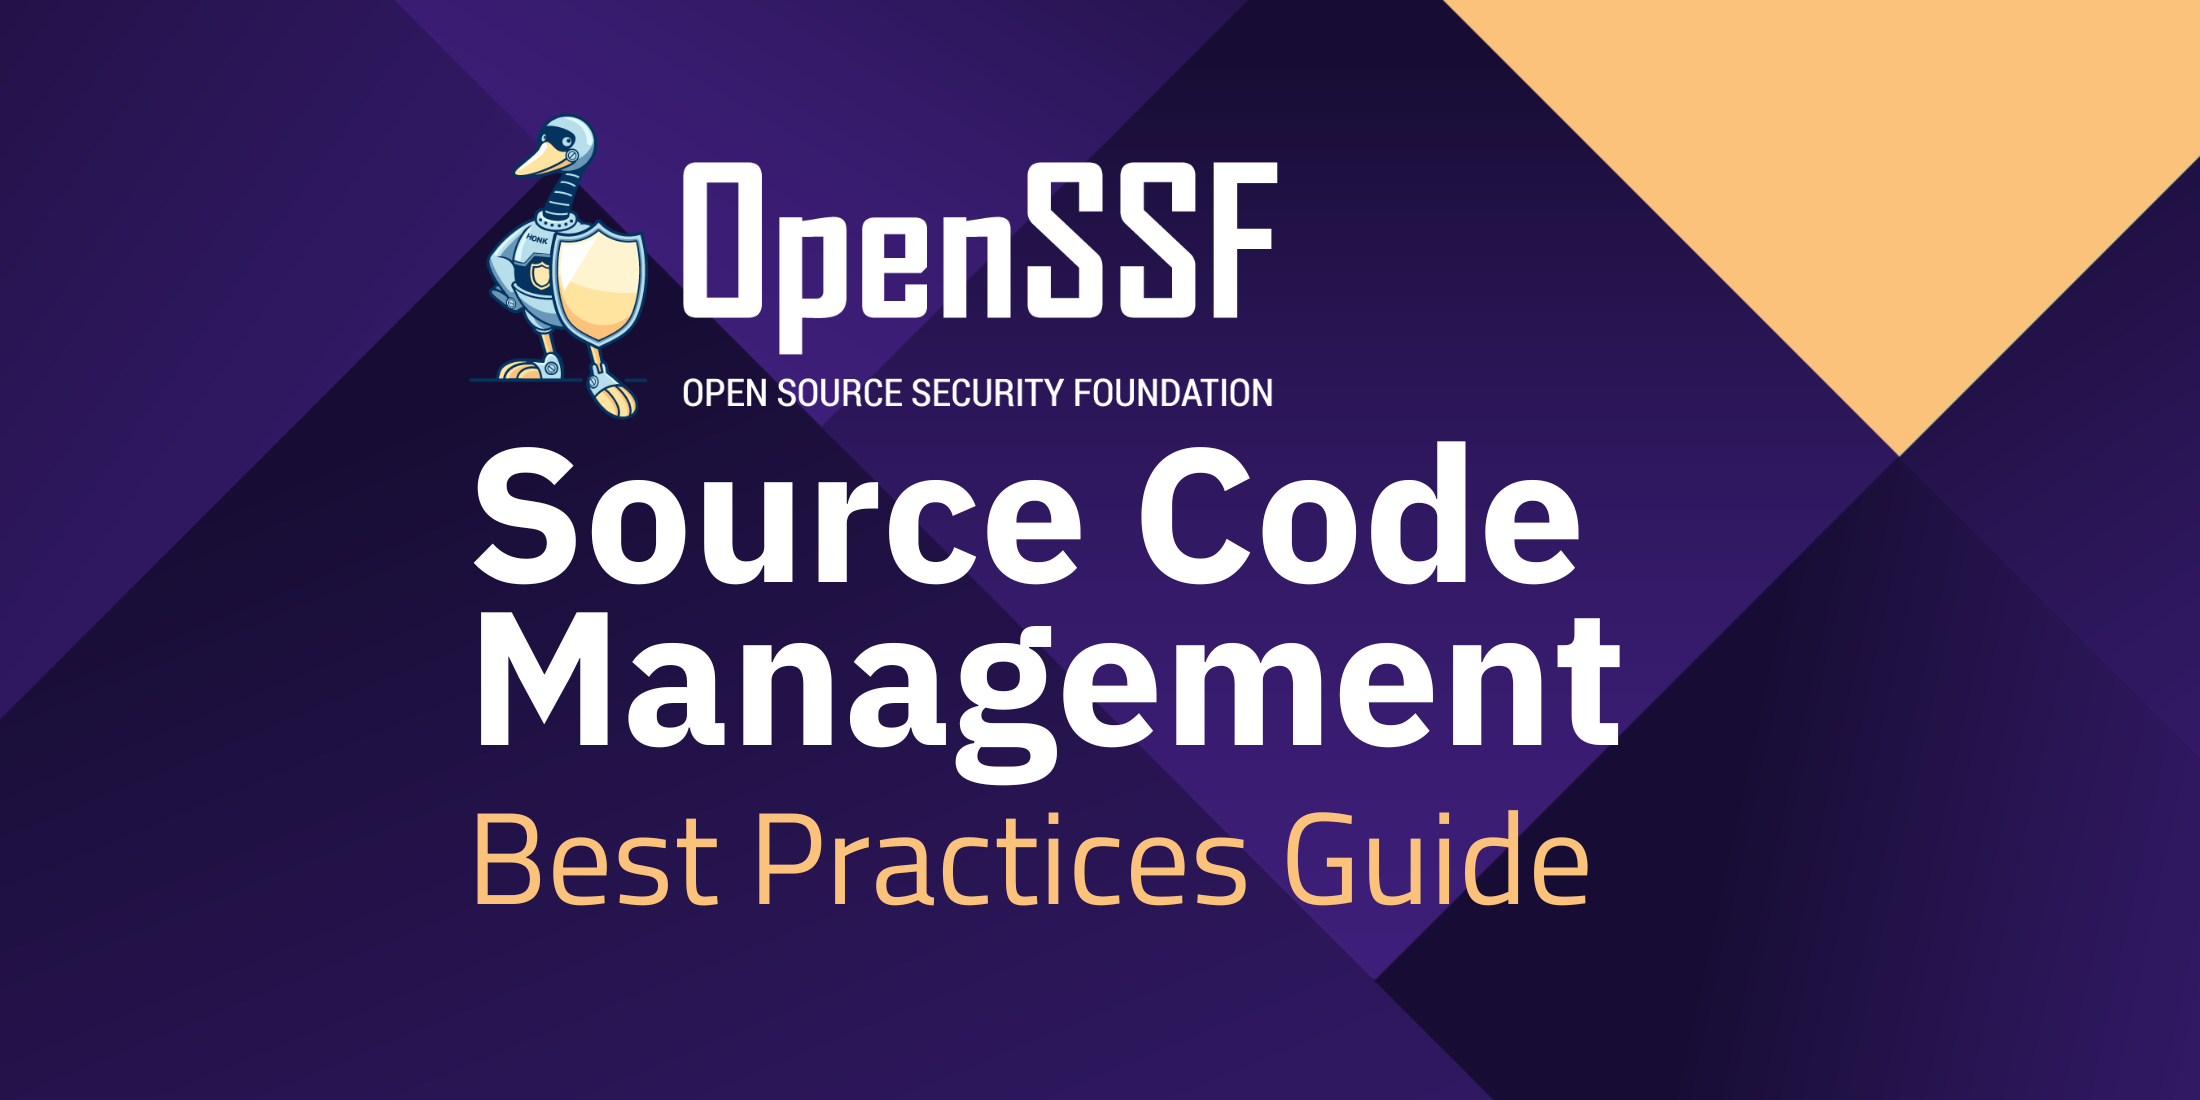 Secure Code Management Best Practices Guide